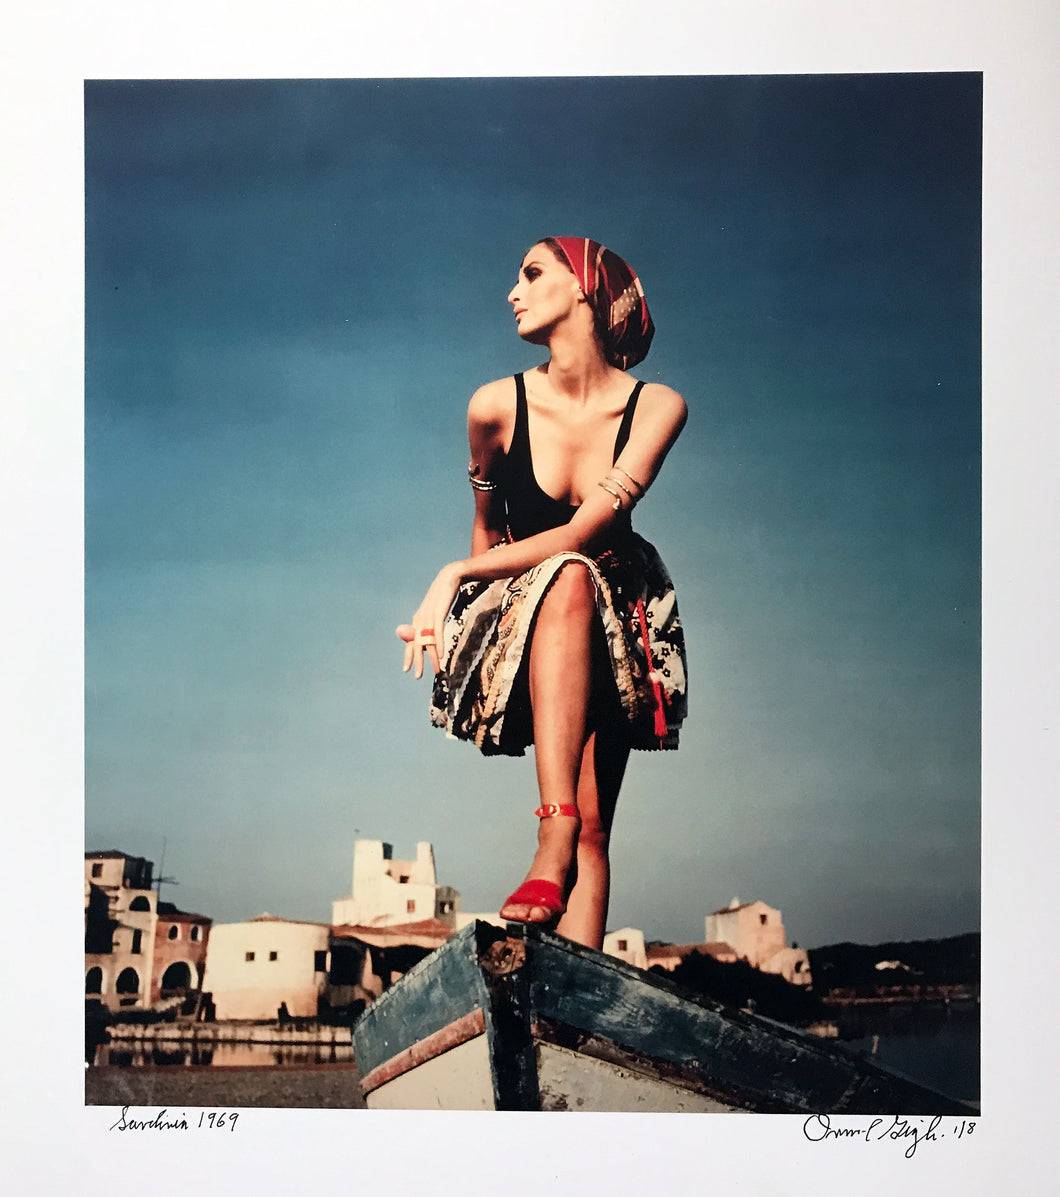 Sardinia, Italy, Color Fashion Photography 1960s by Ormond Gigli